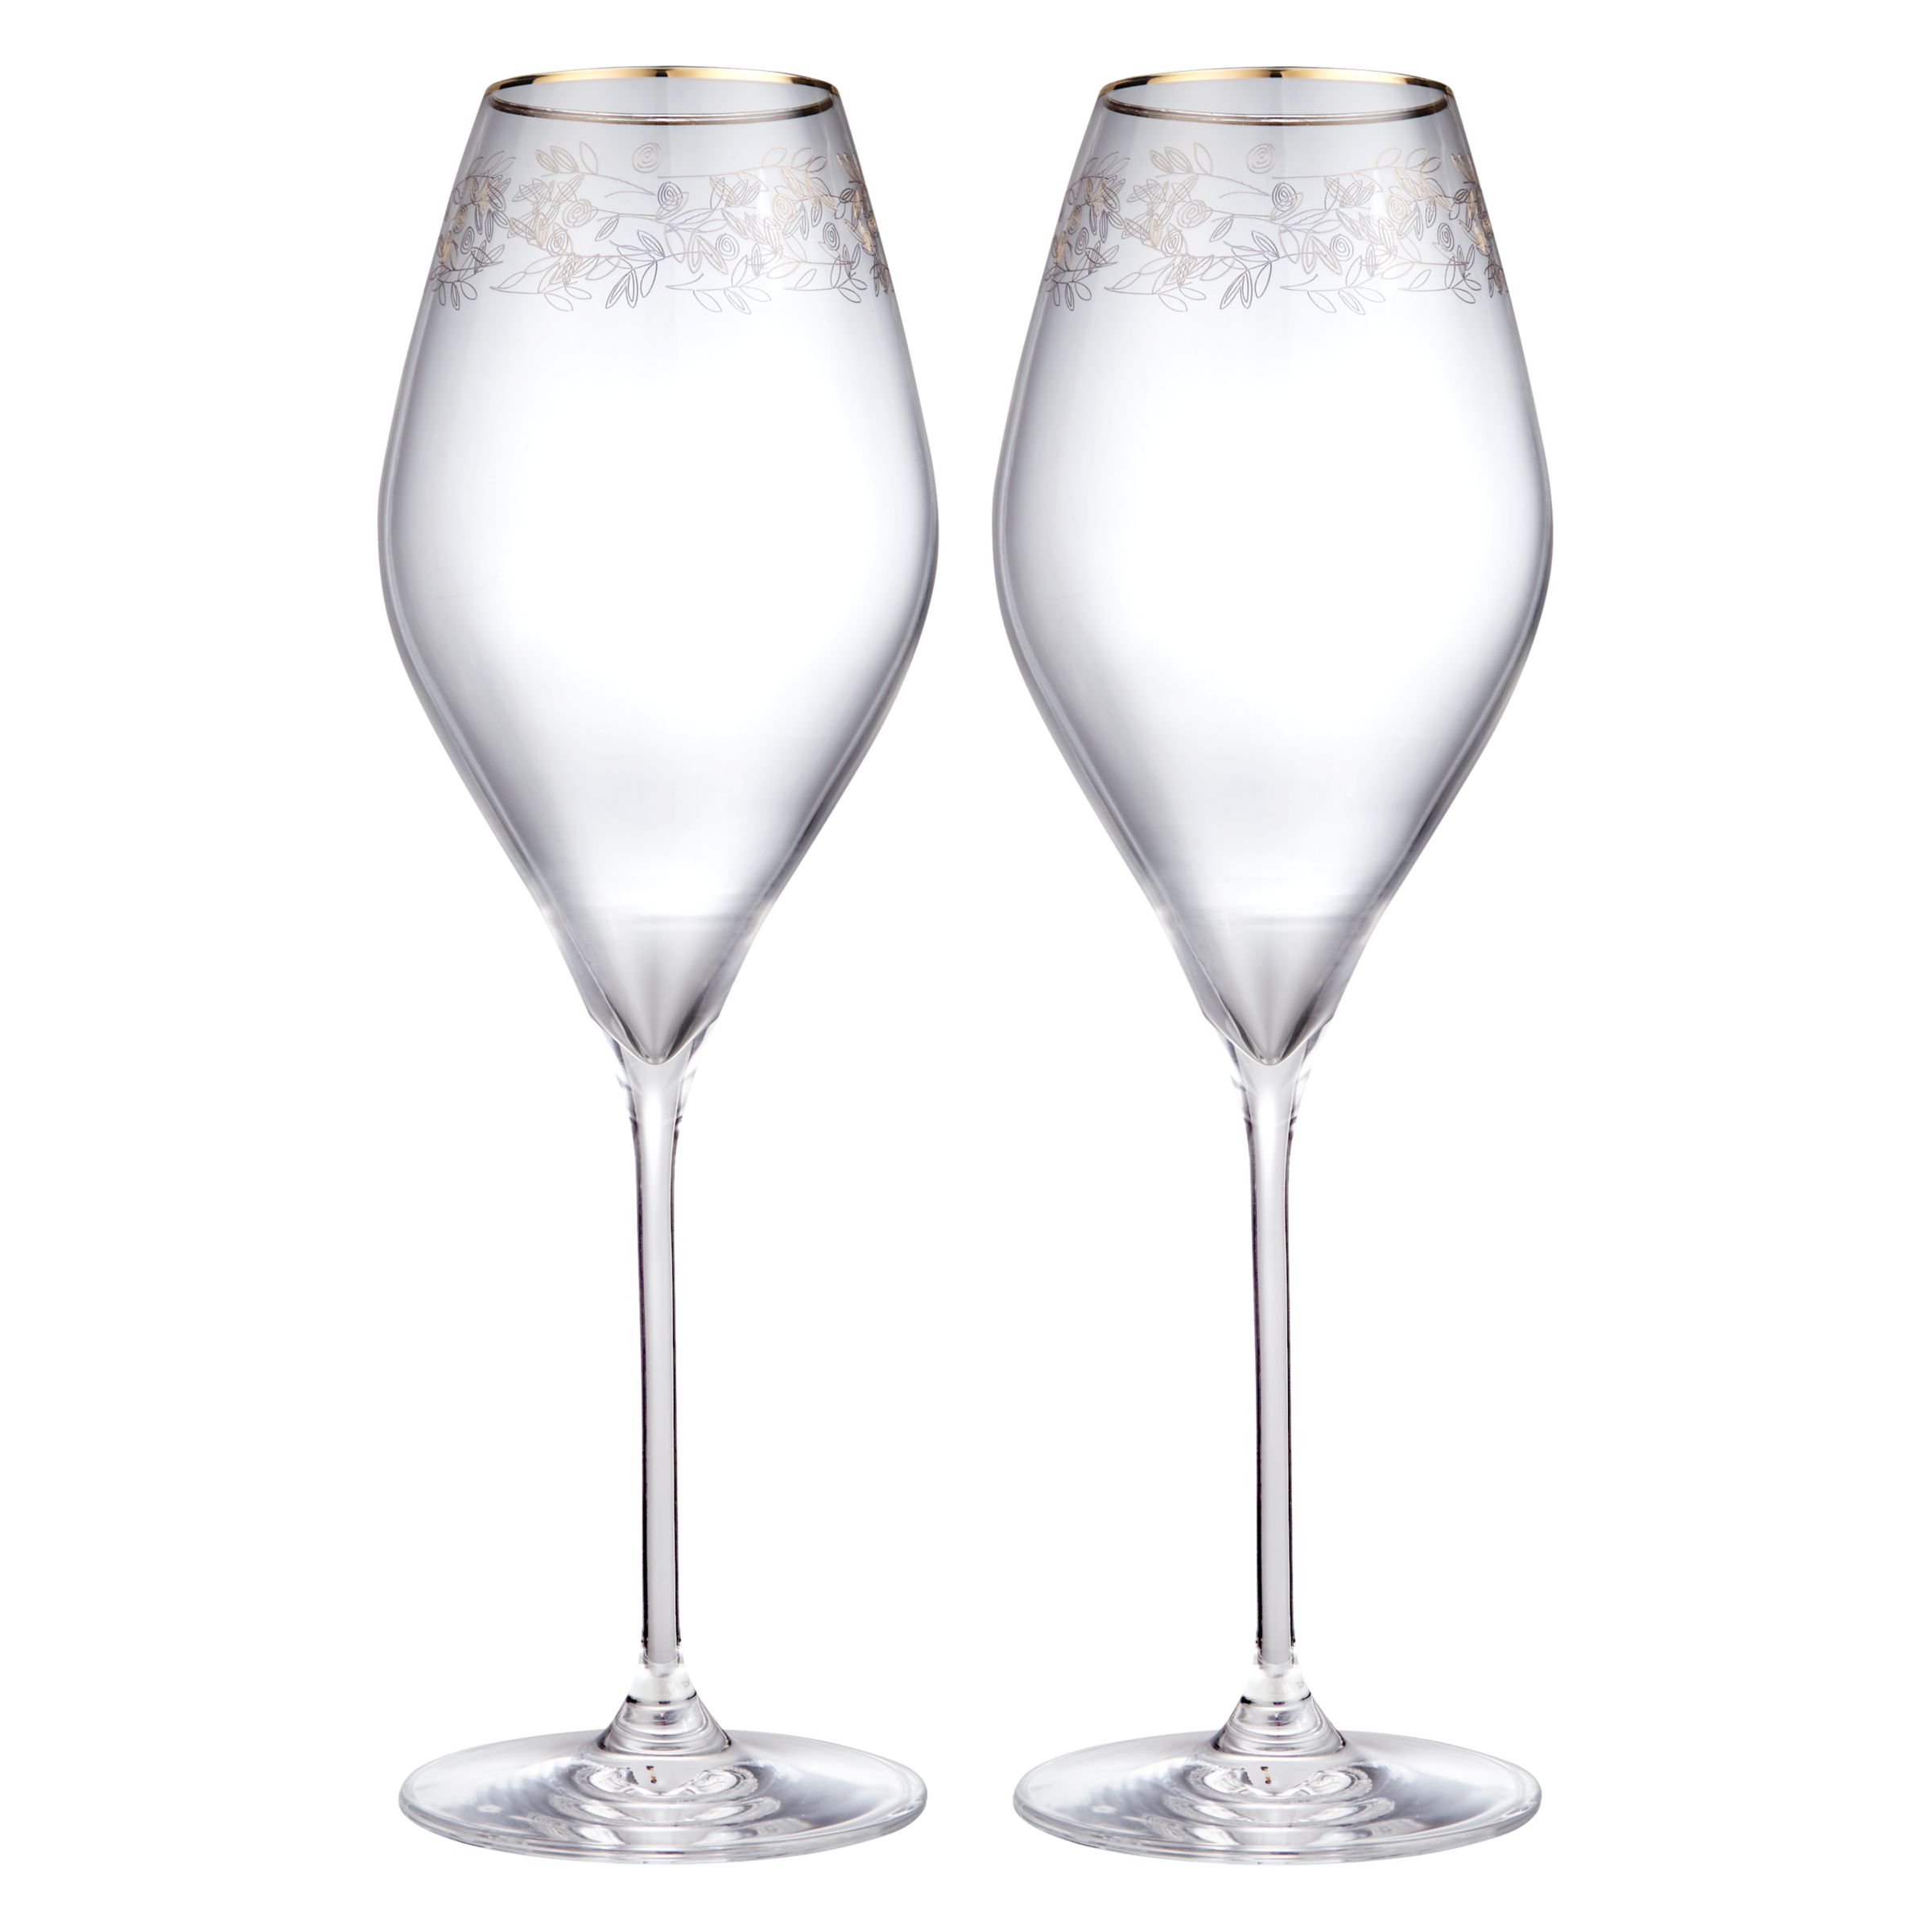 John Lewis Croft Collection Swan Trailing Rose Wine Glass. Set of 2, Clear/Gold, 430ml